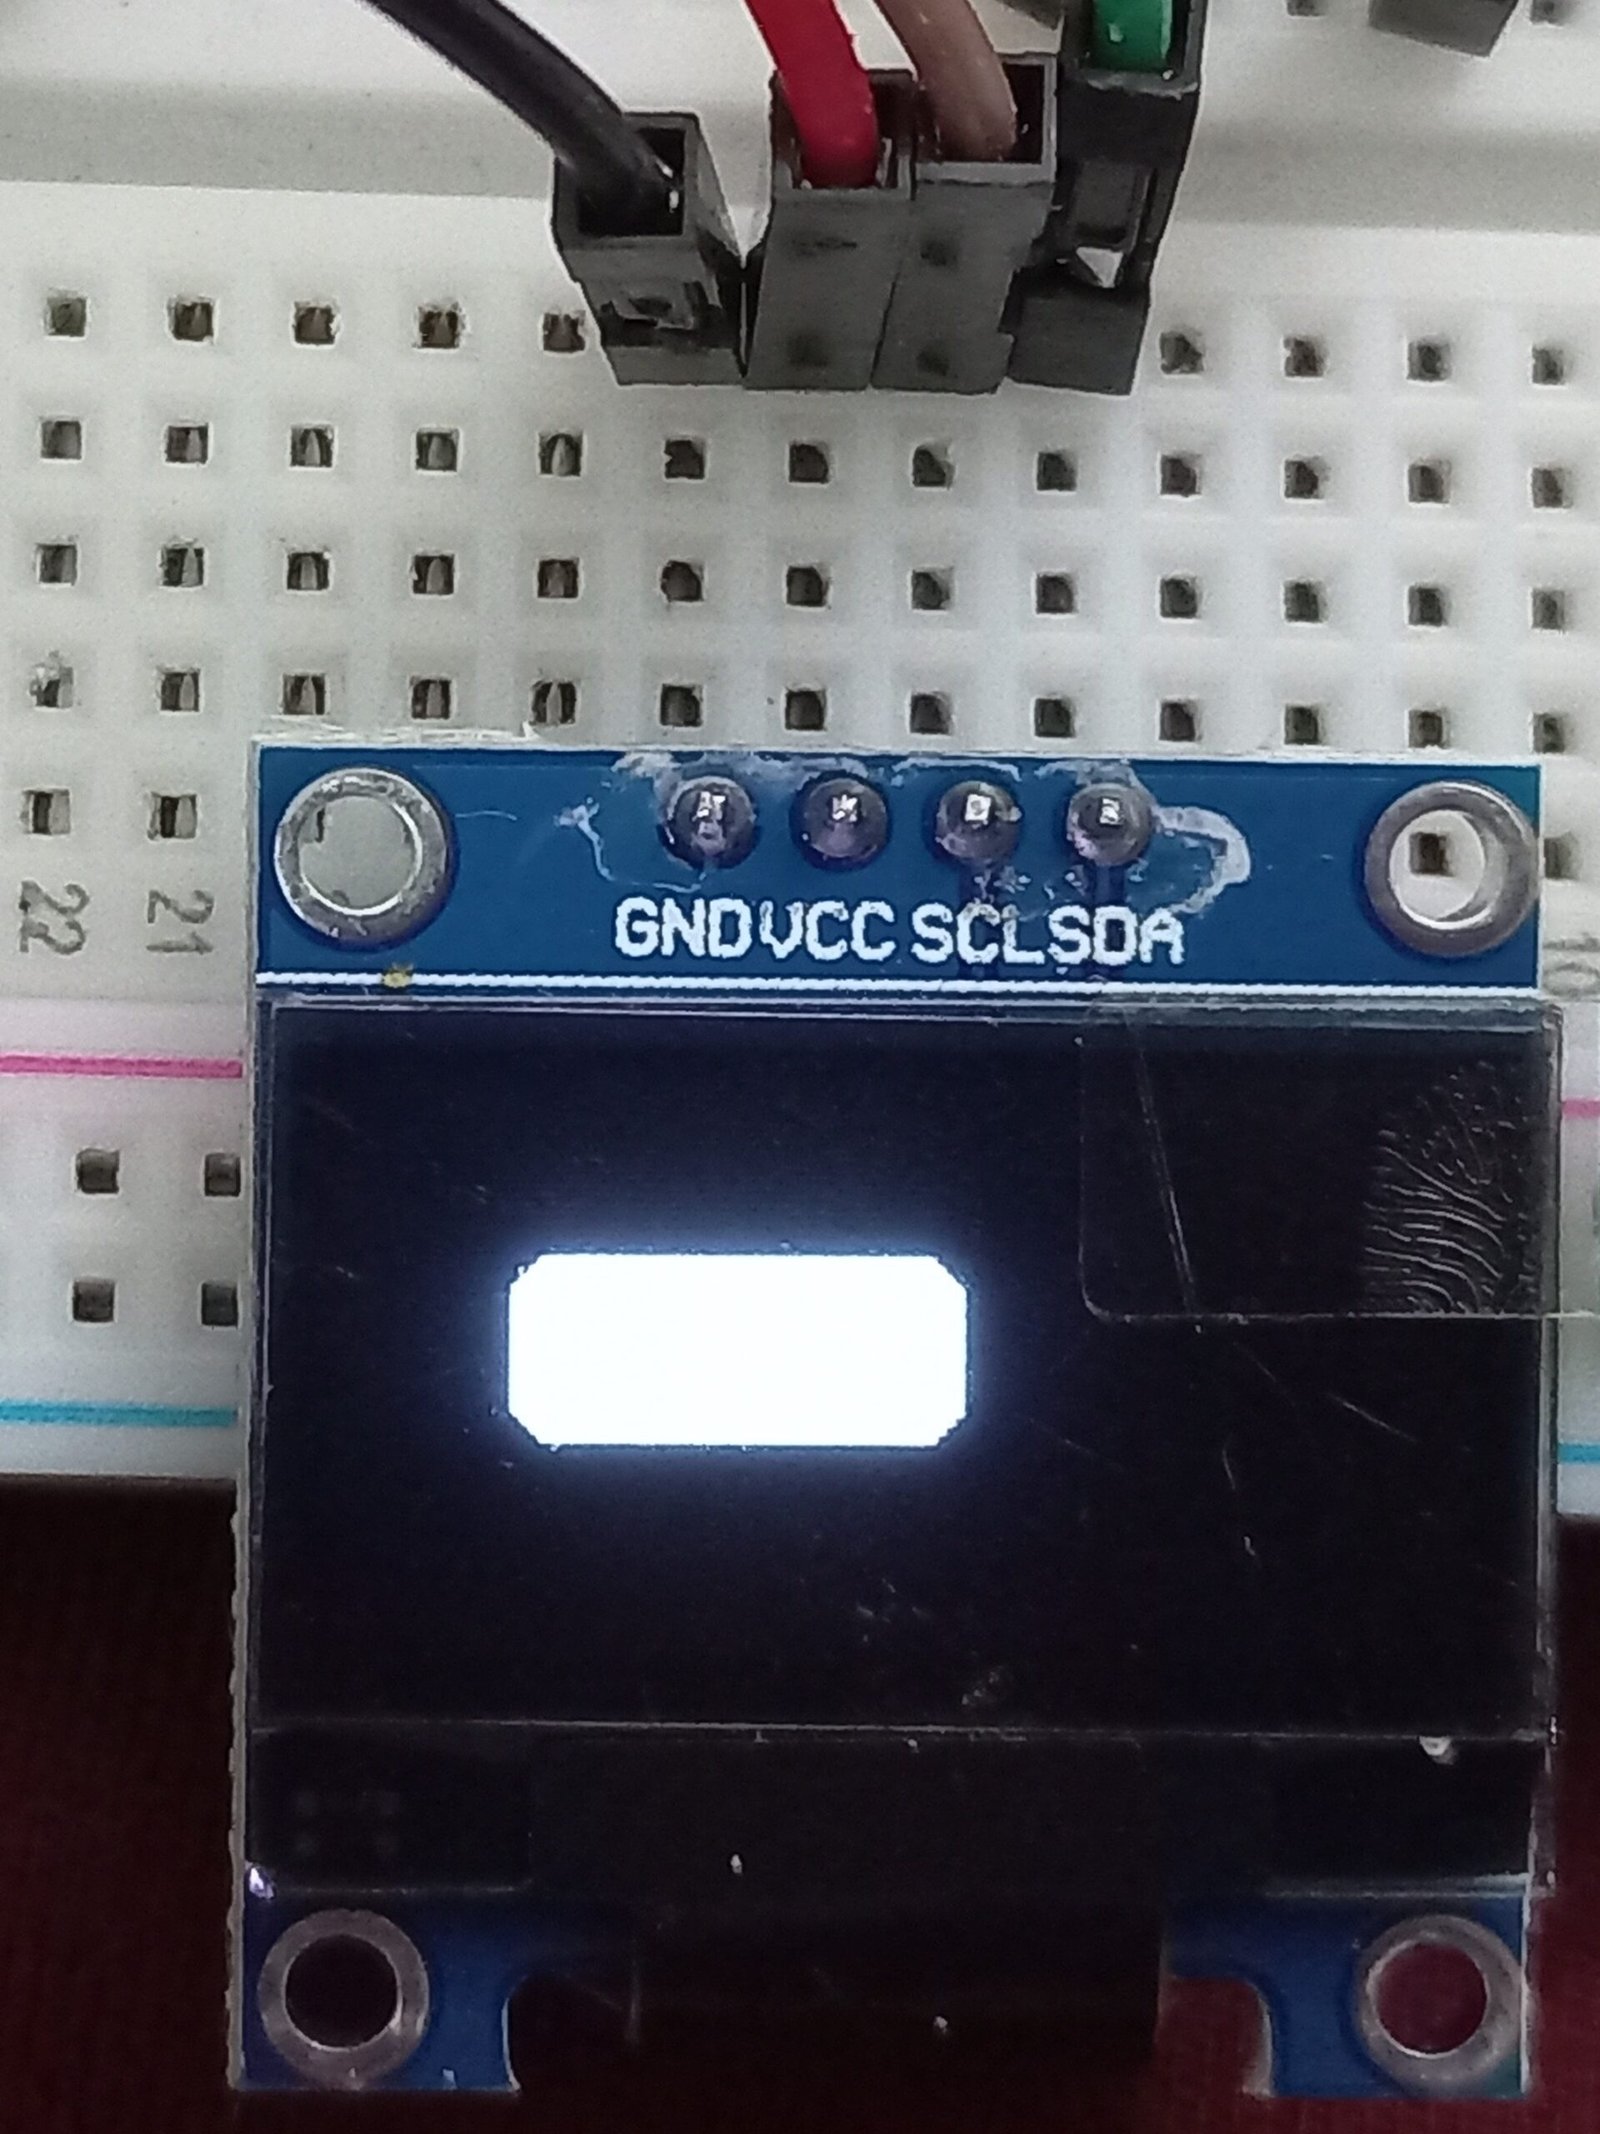 OLED display filled rounded rectangle